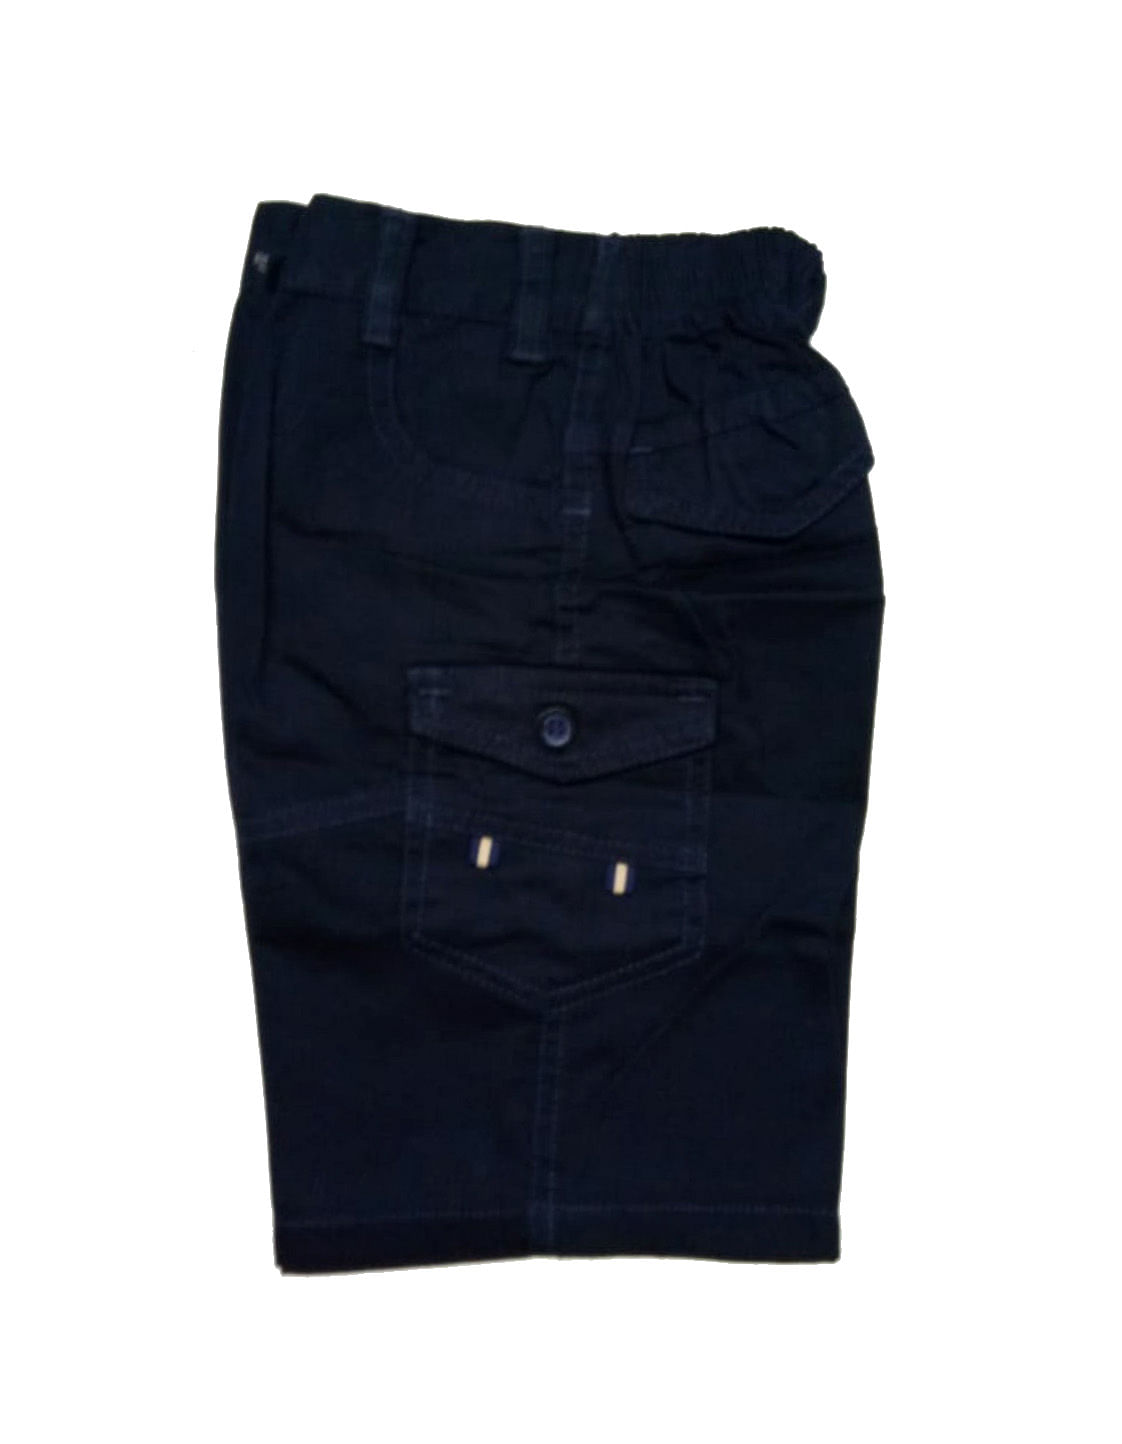 AARUSH DENIM 17-NAVY-KIDS SHORTS AND 3/4TH